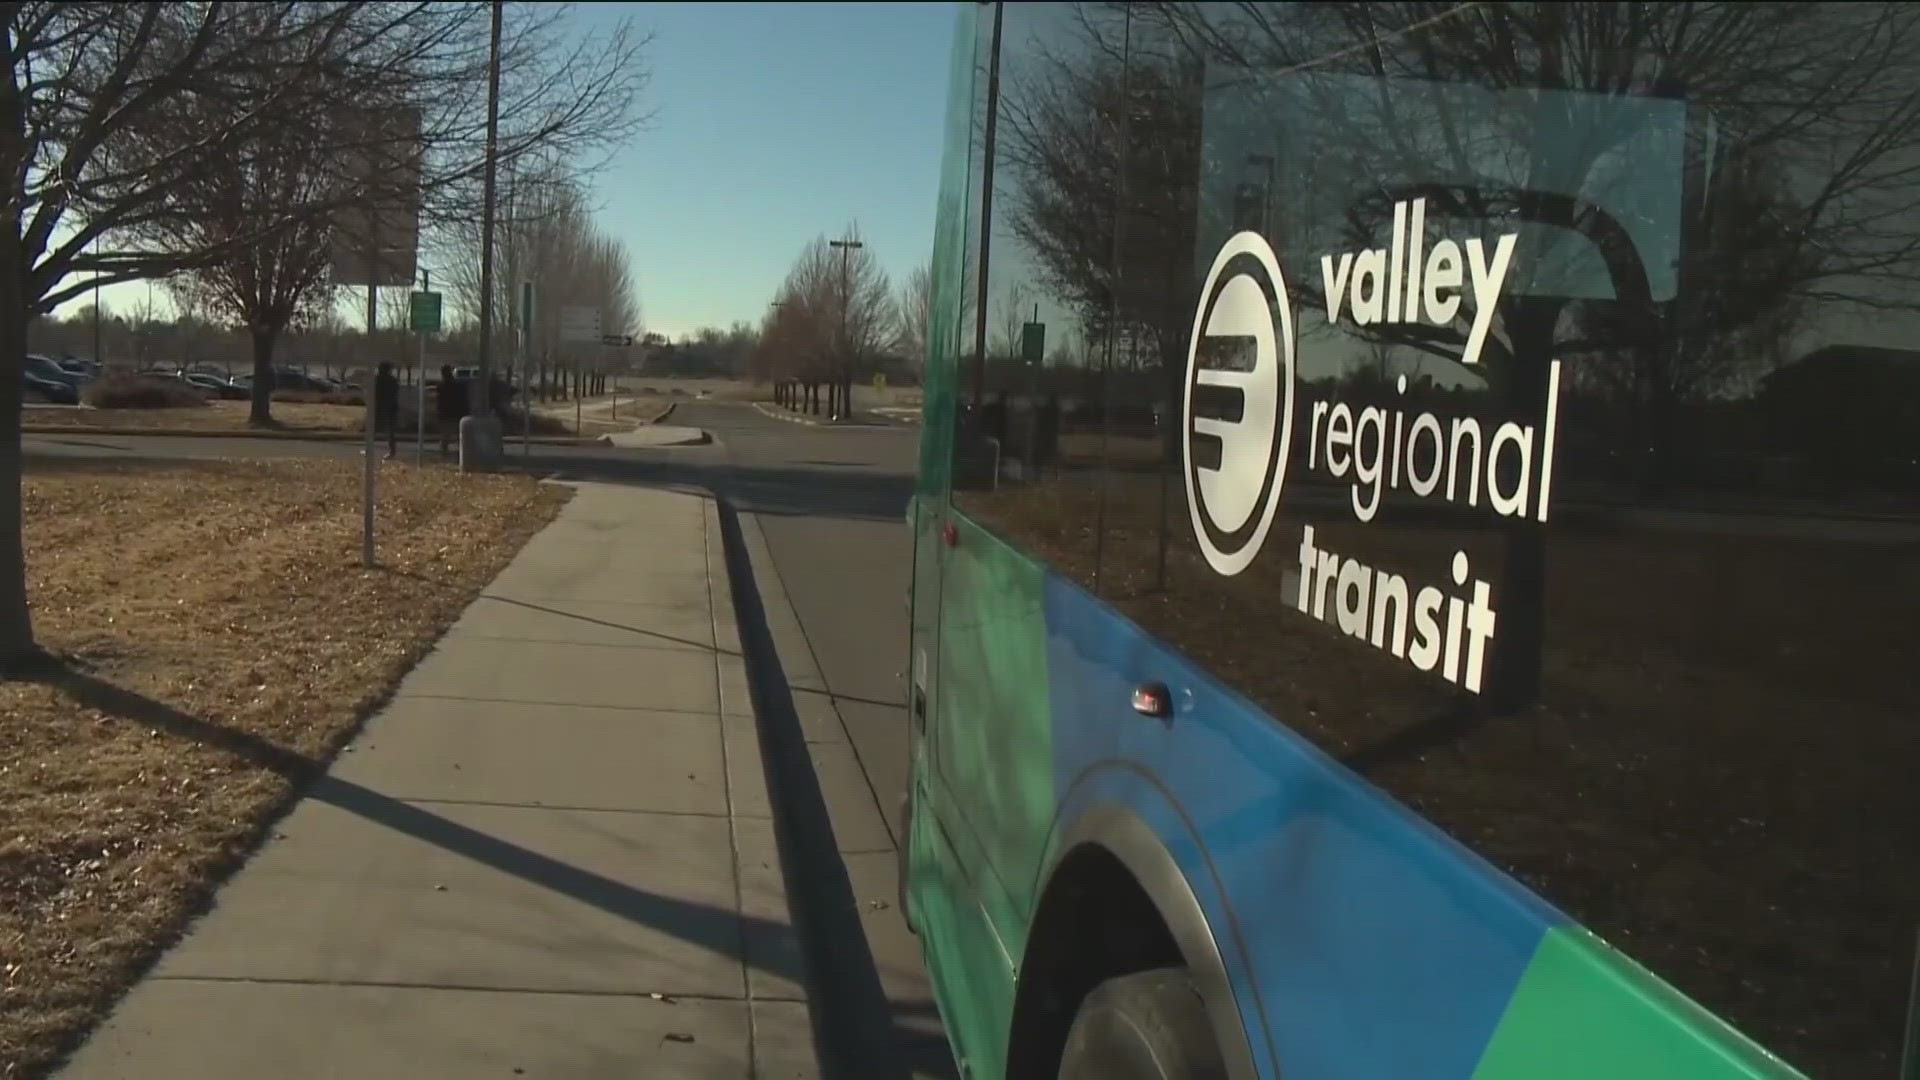 VRT runs the Treasure Valley's bus system. Clegg took the job as CEO a little more than a year ago. In that year, she's seen and made a lot of changes.